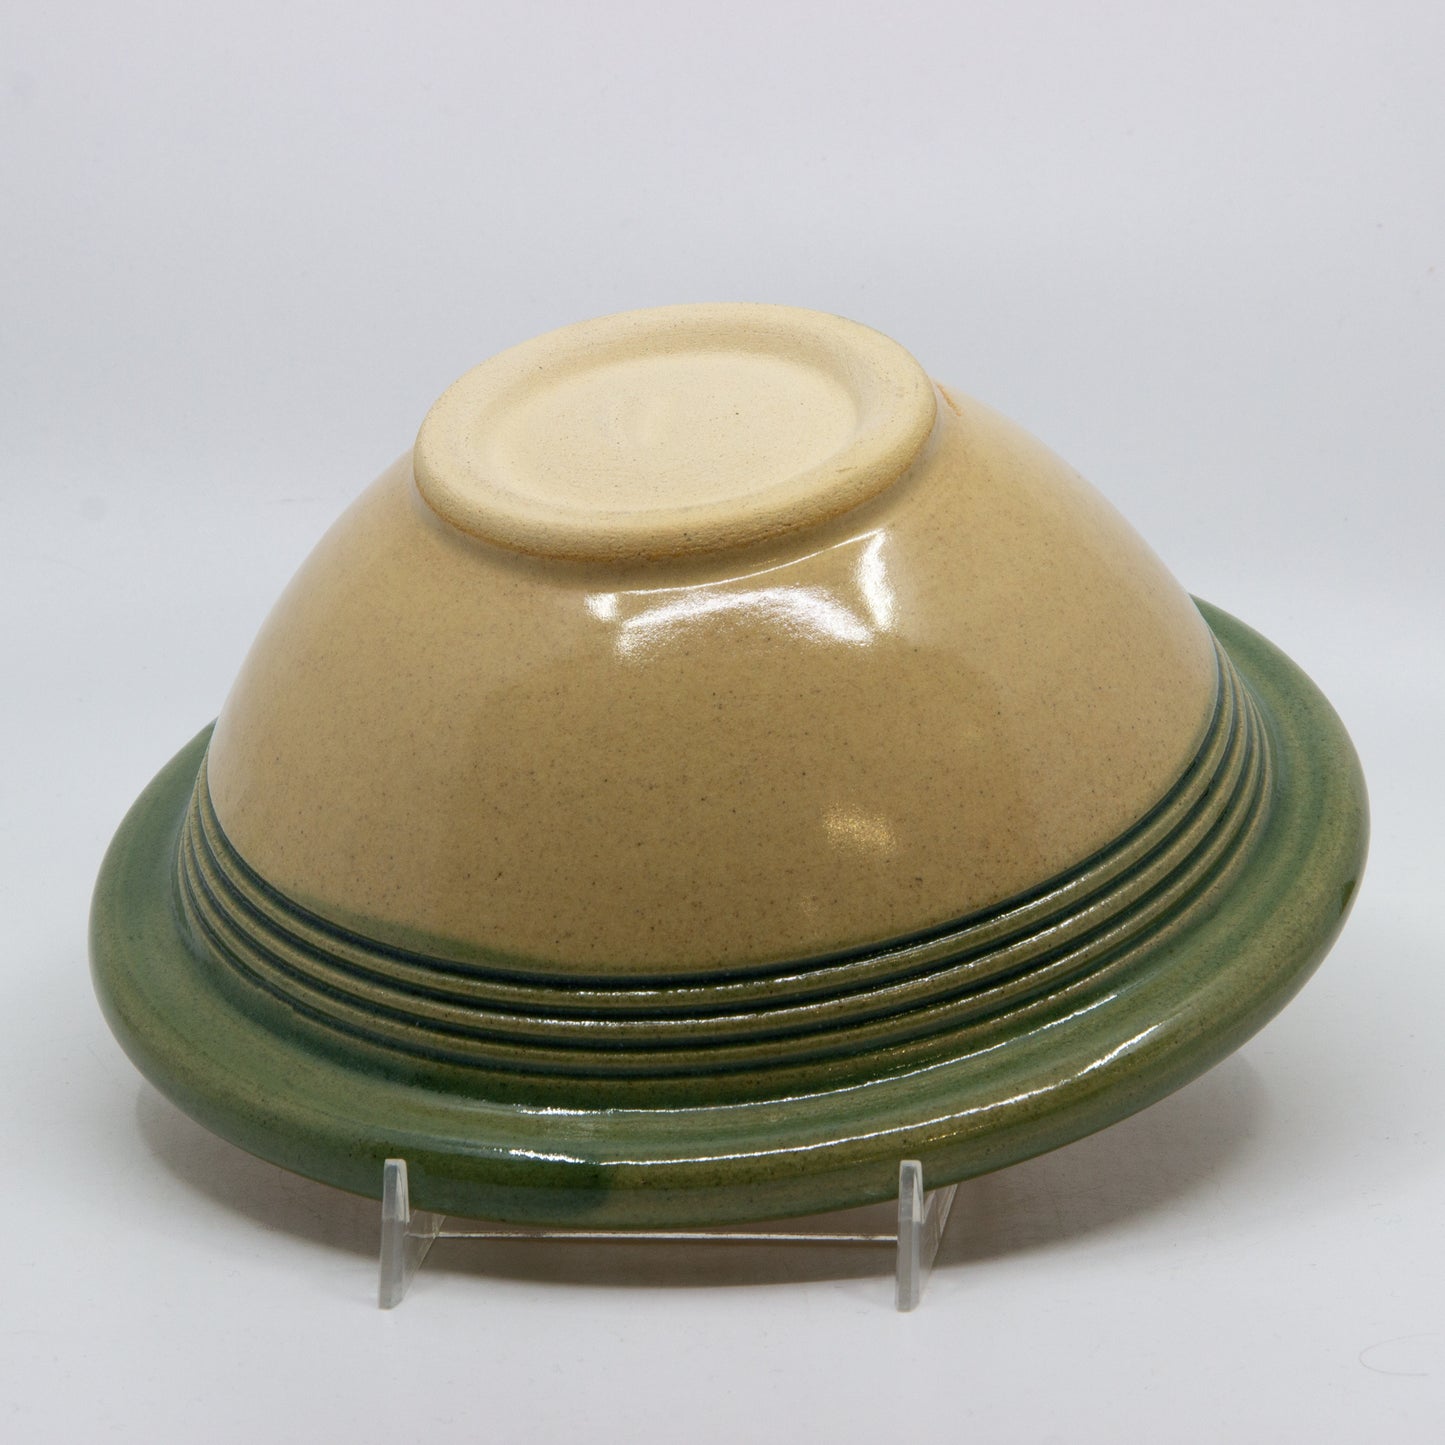 Serving Bowl with Rolled Green Rim